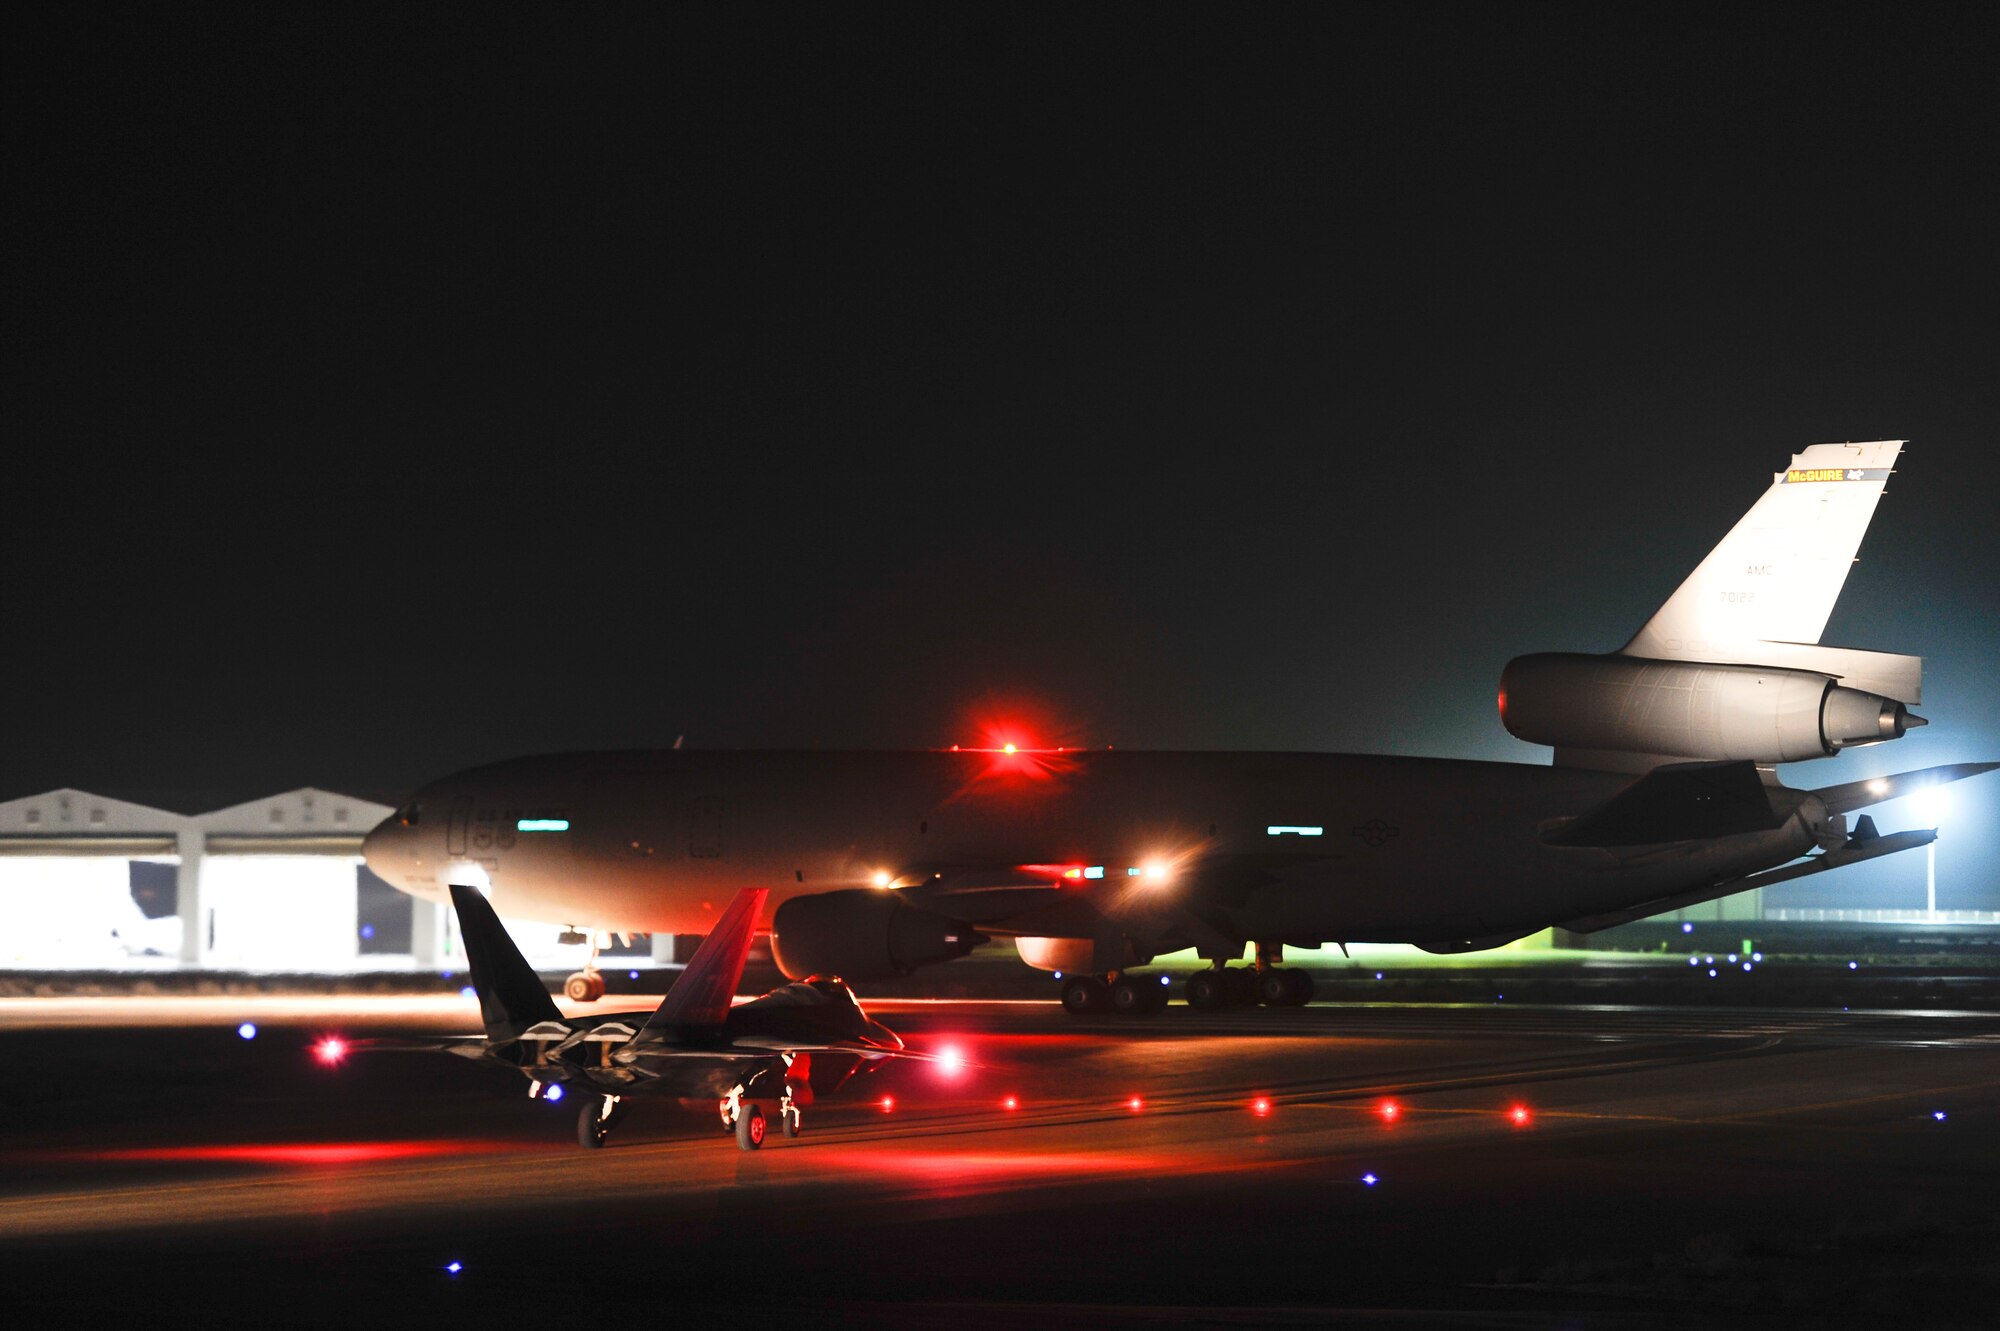 An U.S. Air Force KC-10 Extender and a F-22 Raptor assigned to the 380th Air Expeditionary Wing, Al Dhafra Air Base, Unite Arab Emirates taxi down the runway before departing on a mission in support of Operation Inherent Resolve, Feb. 13, 2018. The name Inherent Resolve is intended to reflect the unwavering resolve and deep commitment of the U.S. and partner nations in the region and the wider international community.
 (U.S. Air Force photo by Tech. Sgt. Anthony Nelson Jr.)